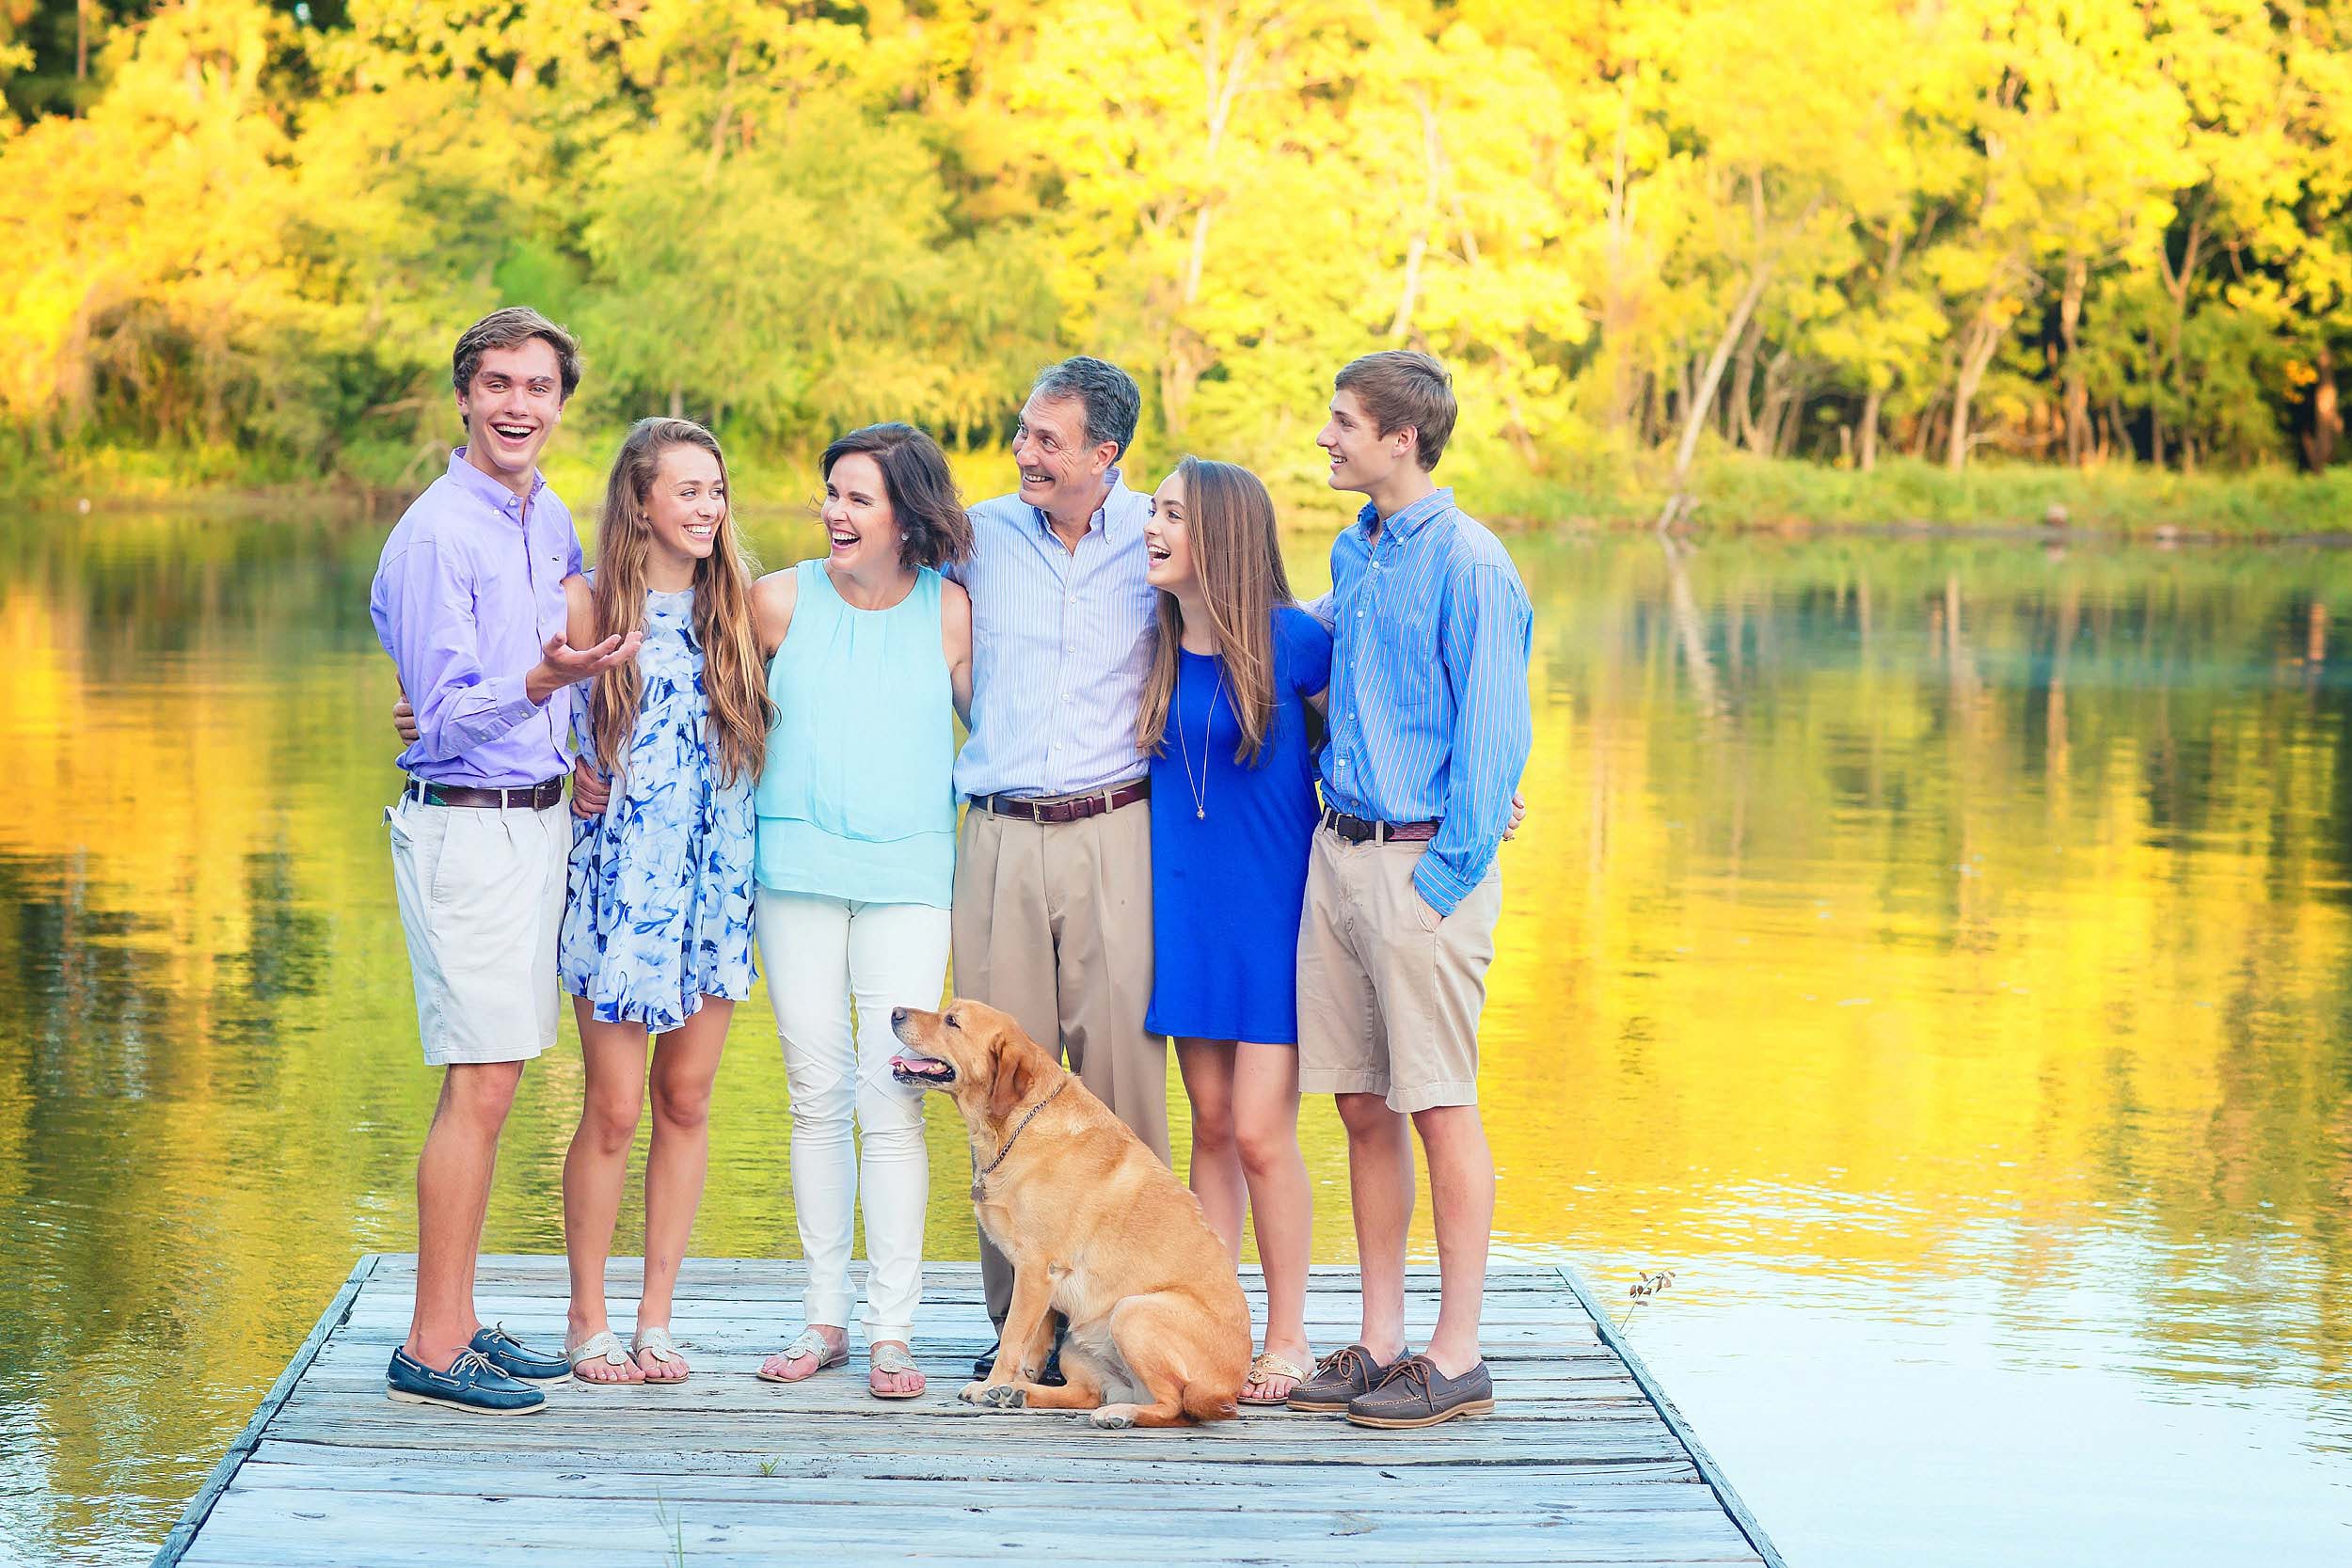  Fun family portrait with teenagers and dog in The Woodlands, Texas by spryART photography. 